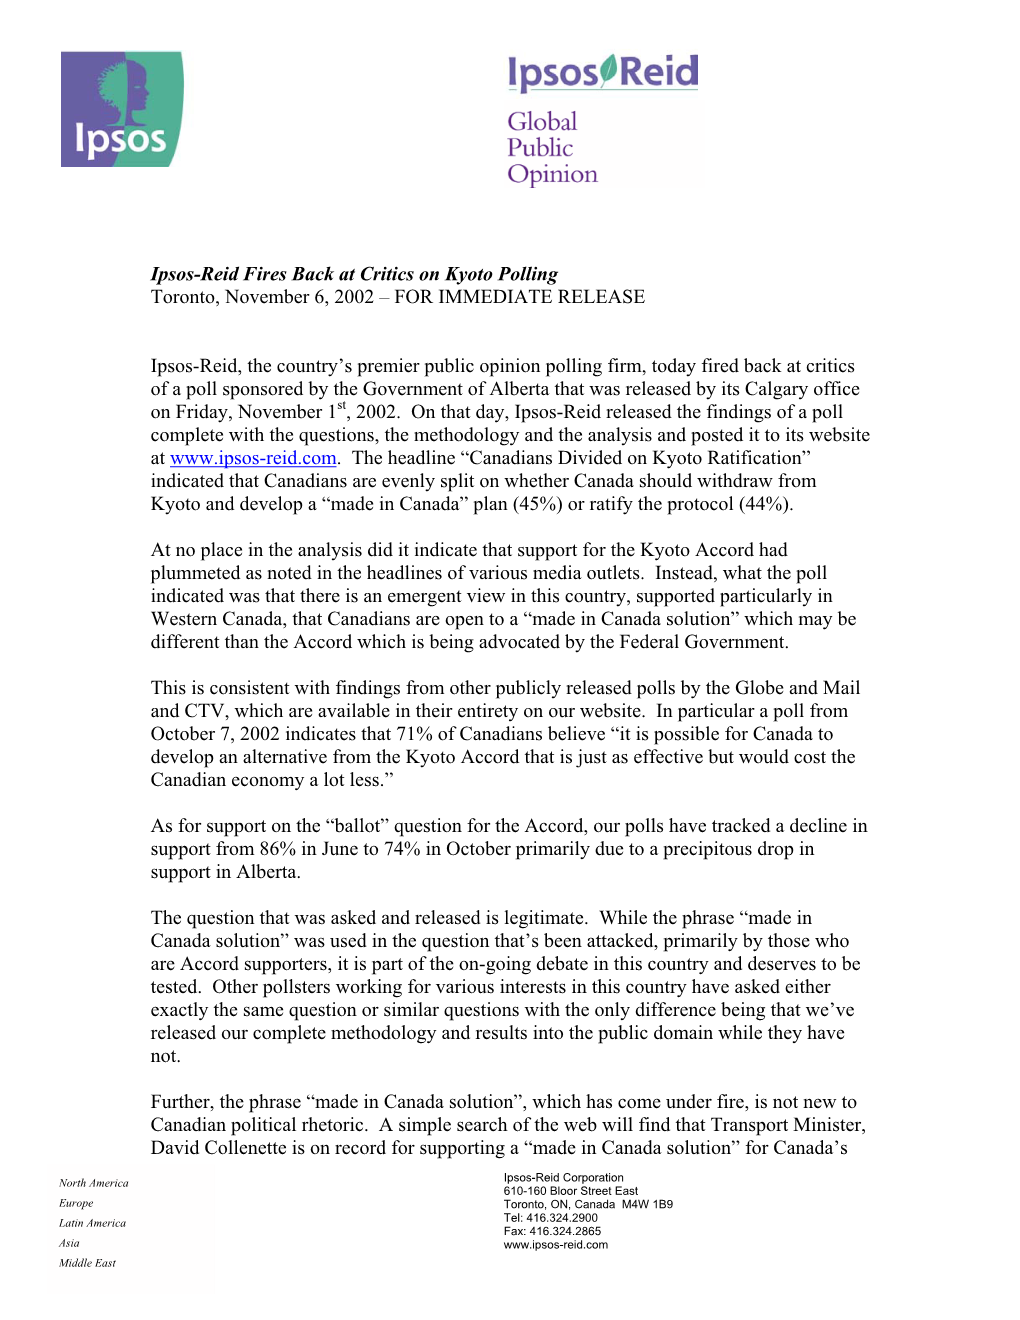 Ipsos-Reid Fires Back at Critics on Kyoto Polling Toronto, November 6, 2002 – for IMMEDIATE RELEASE